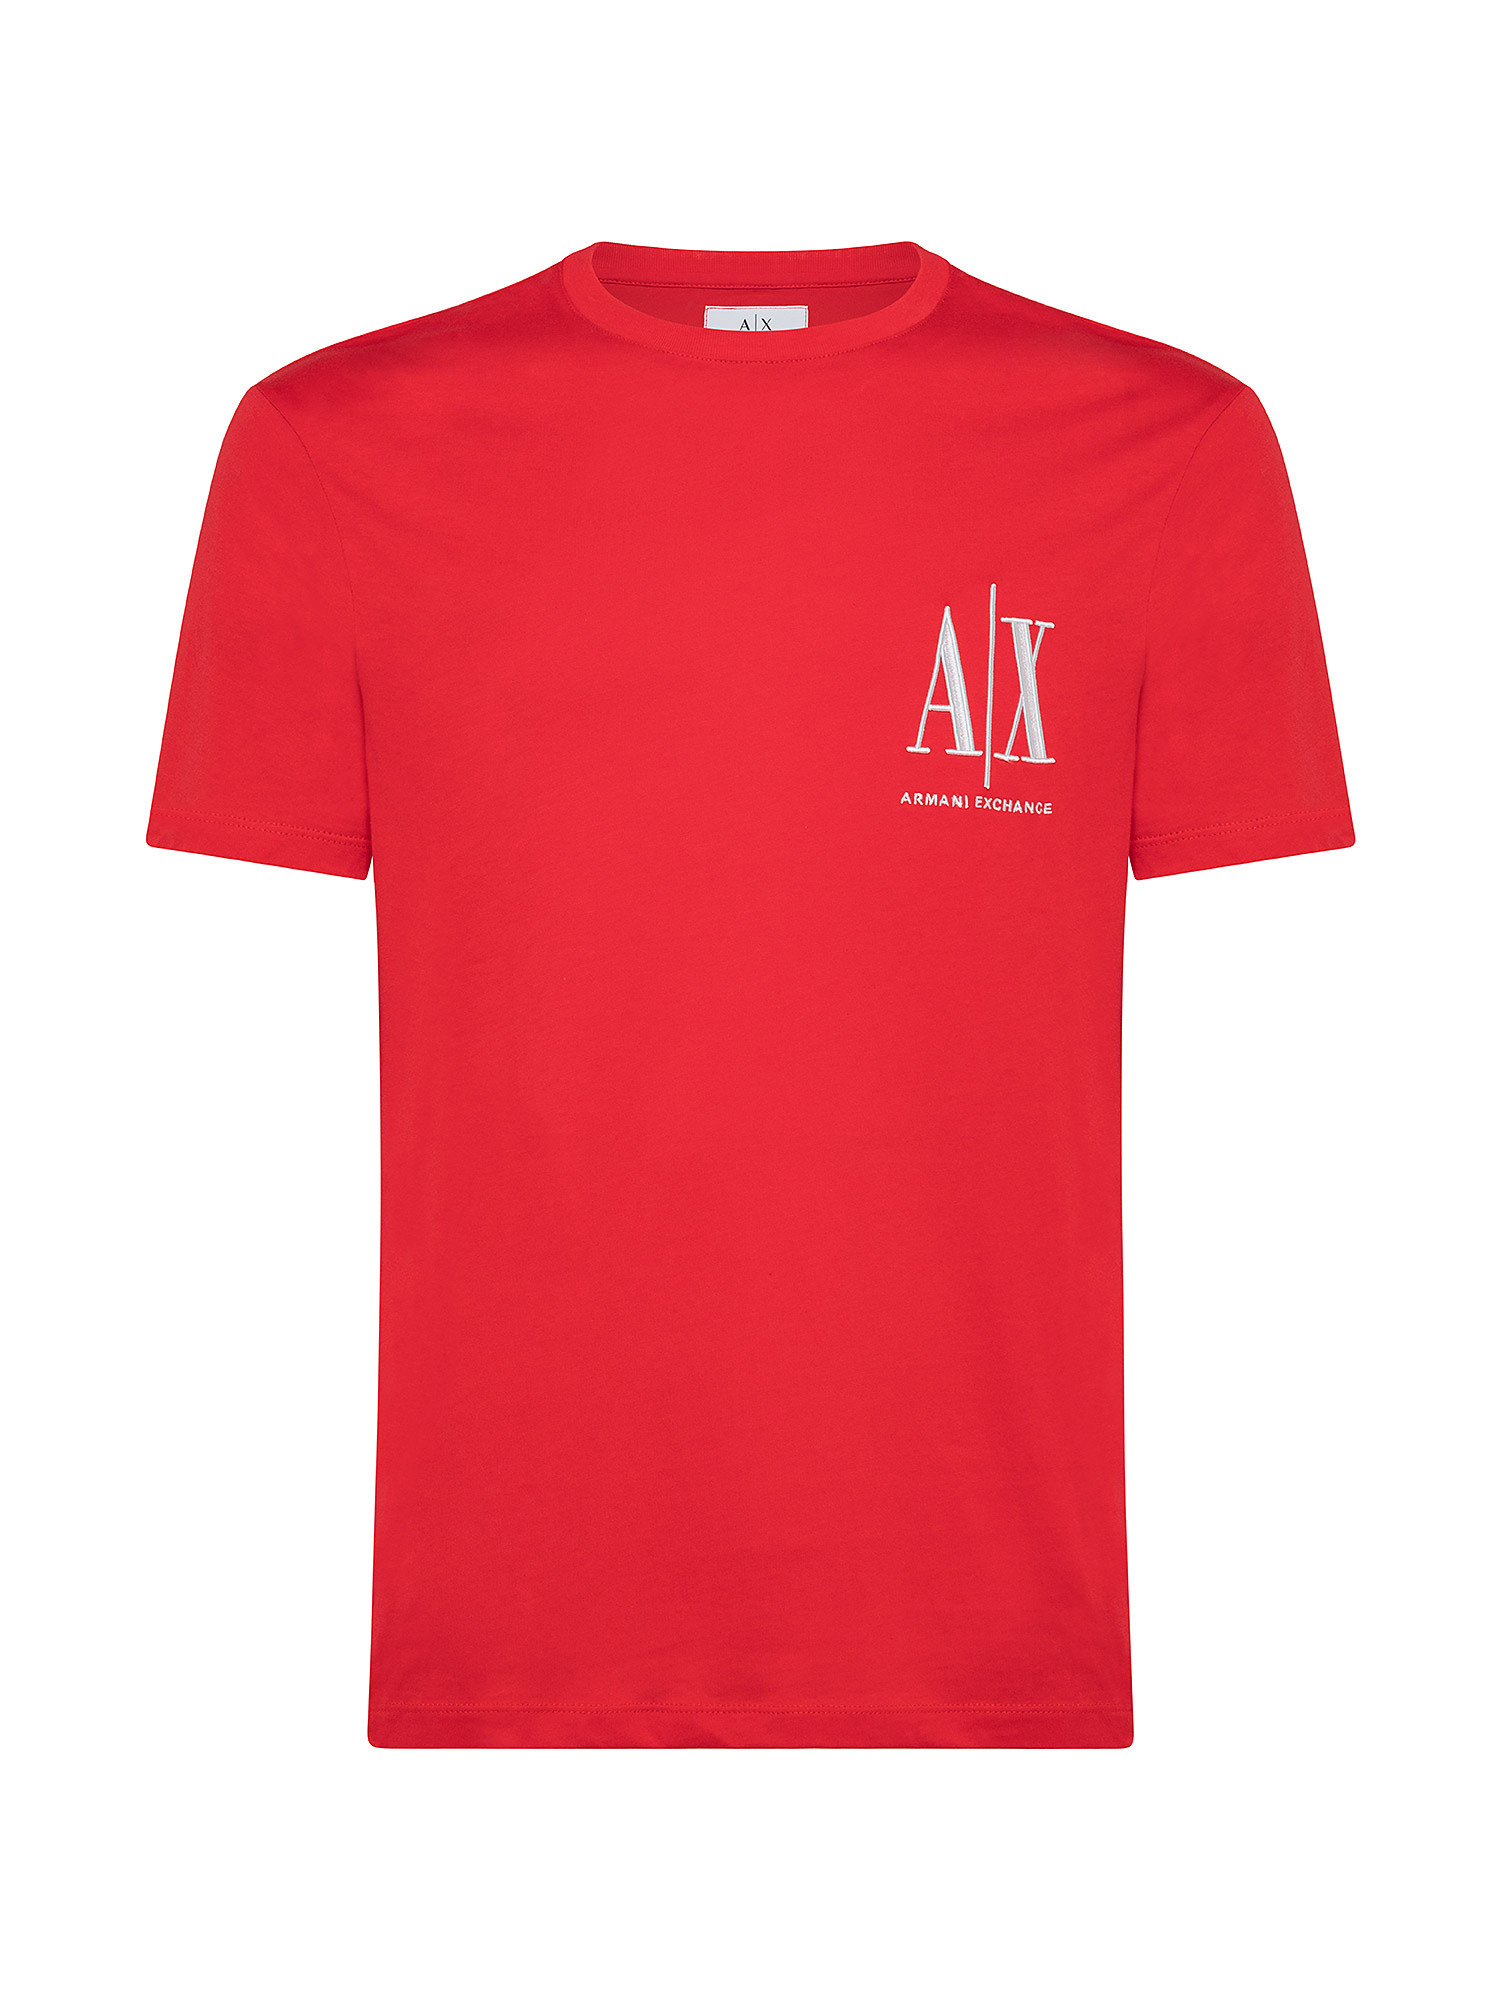 T-Shirt, Rosso, large